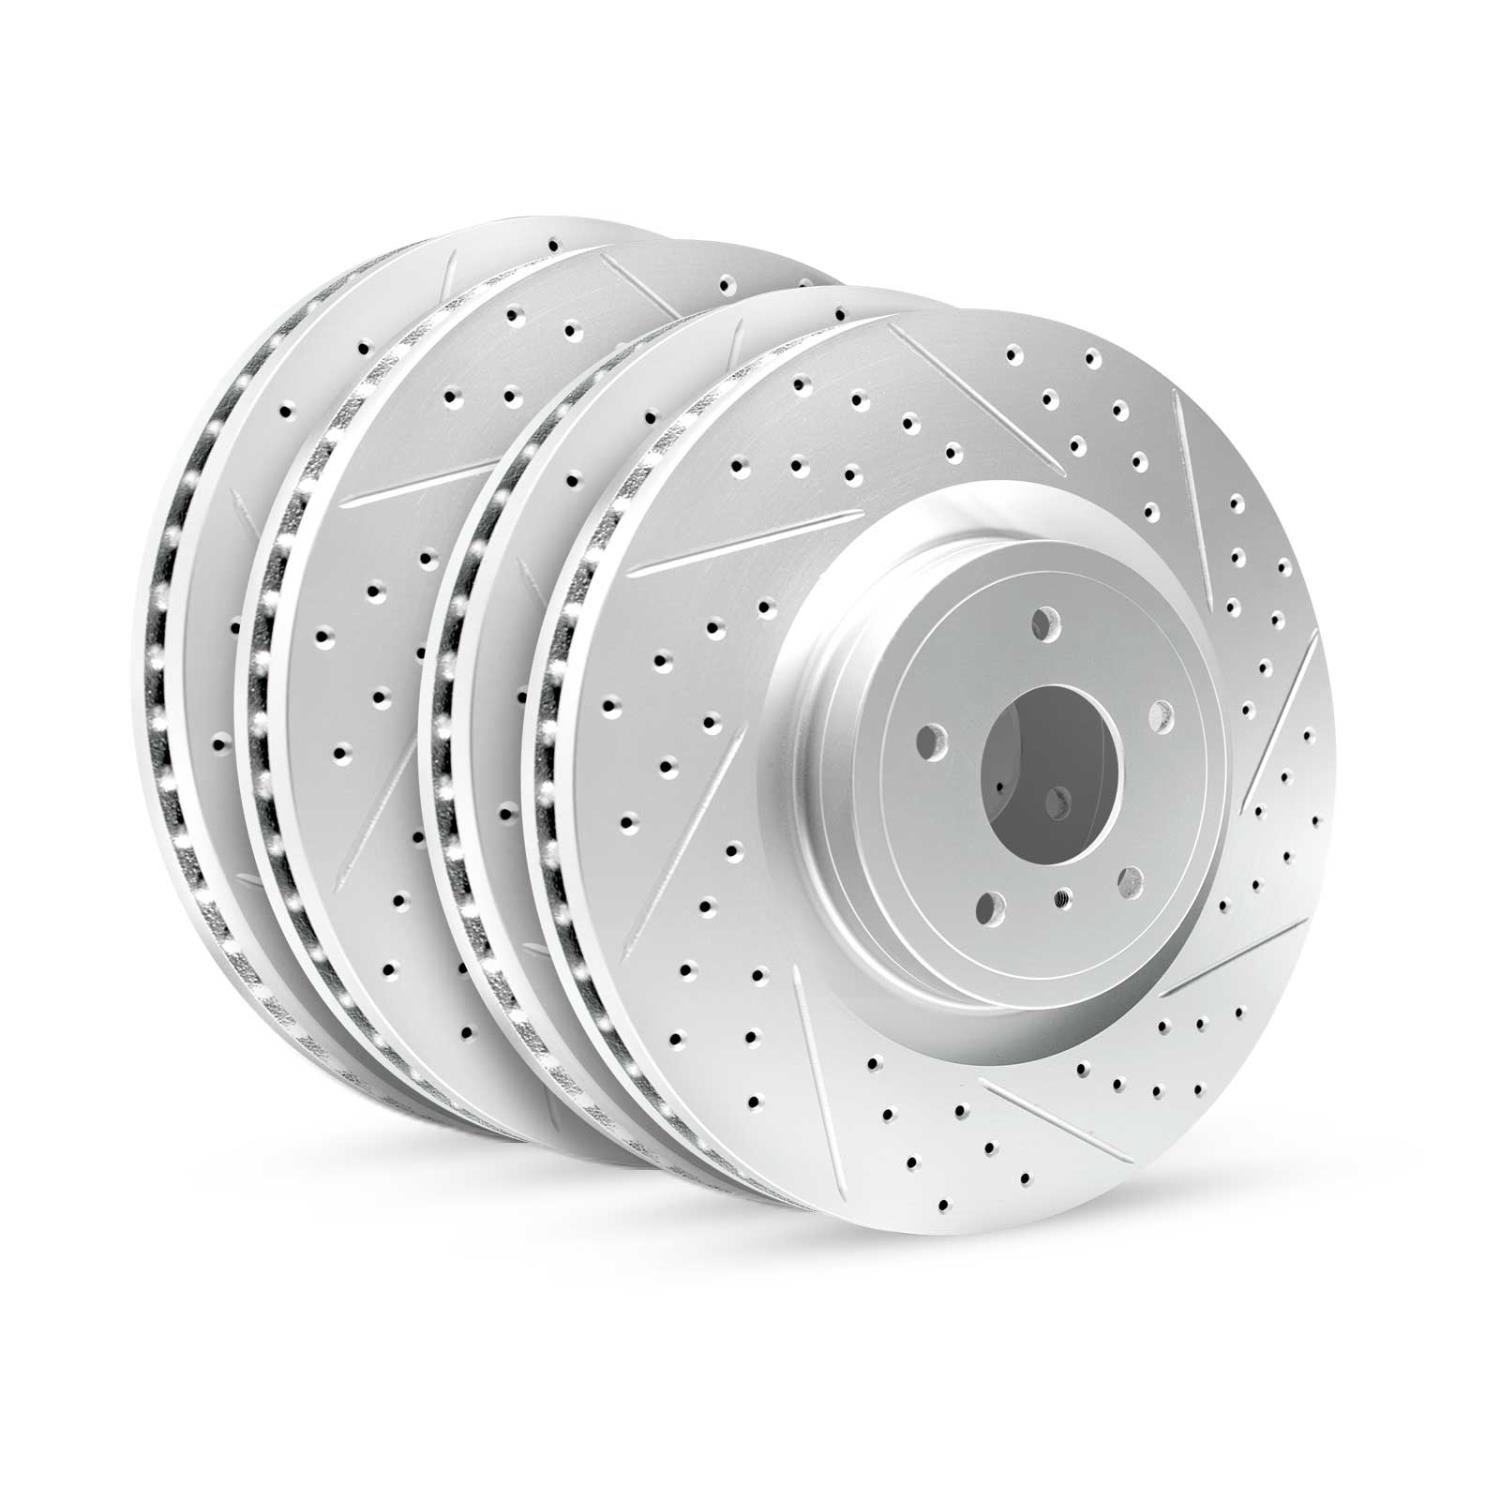 GEO-Carbon Drilled/Slotted Rotors, 2003-2008 BMW, Position: Front/Rear